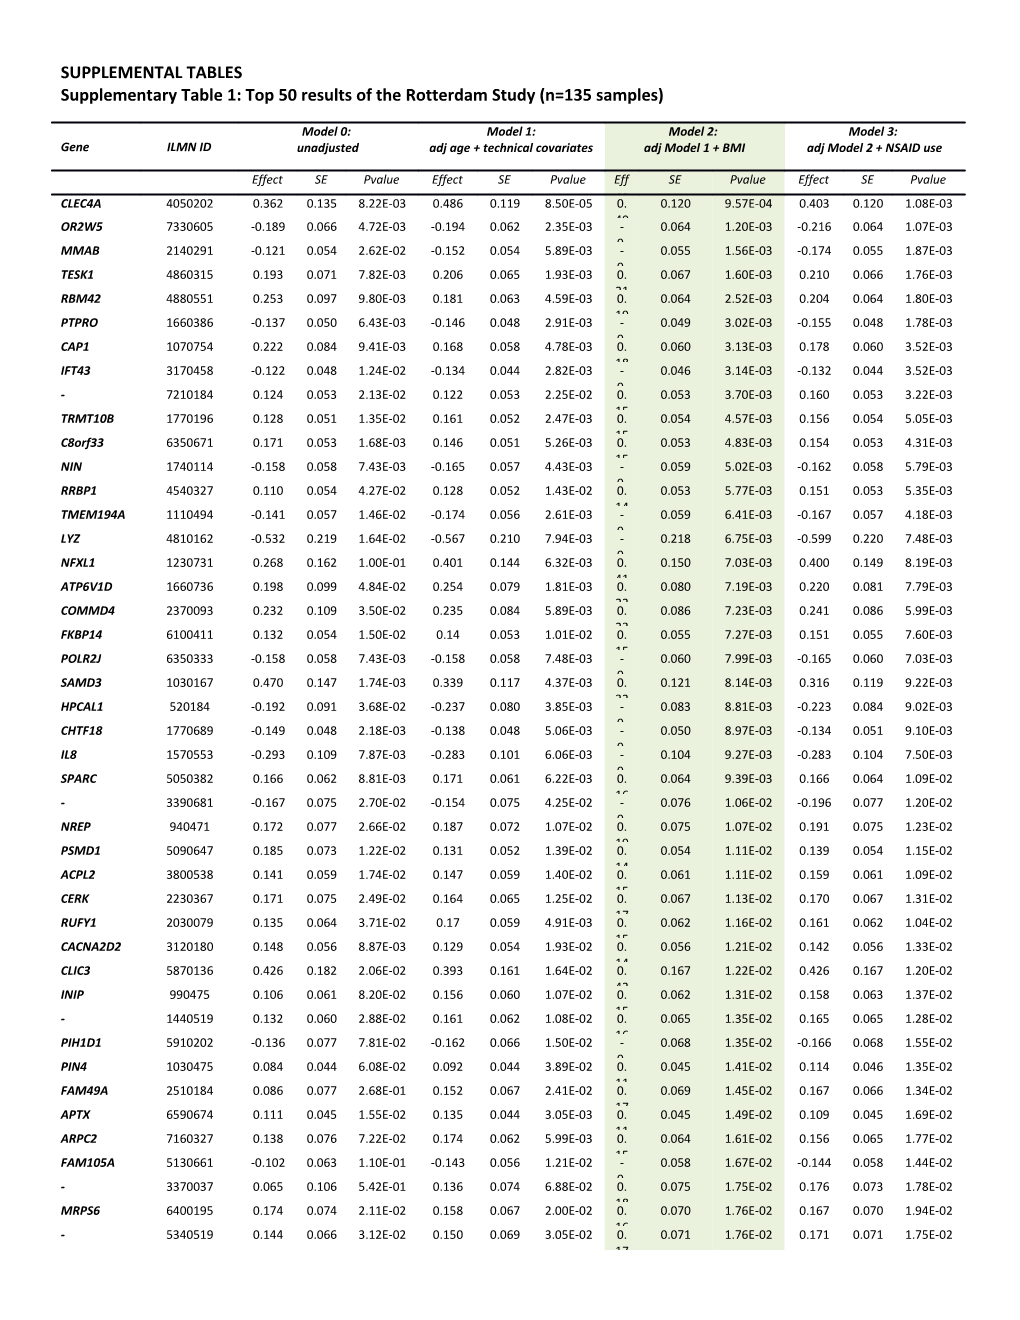 Supplementary Table 1: Top 50 Results of the Rotterdam Study (N=135 Samples)